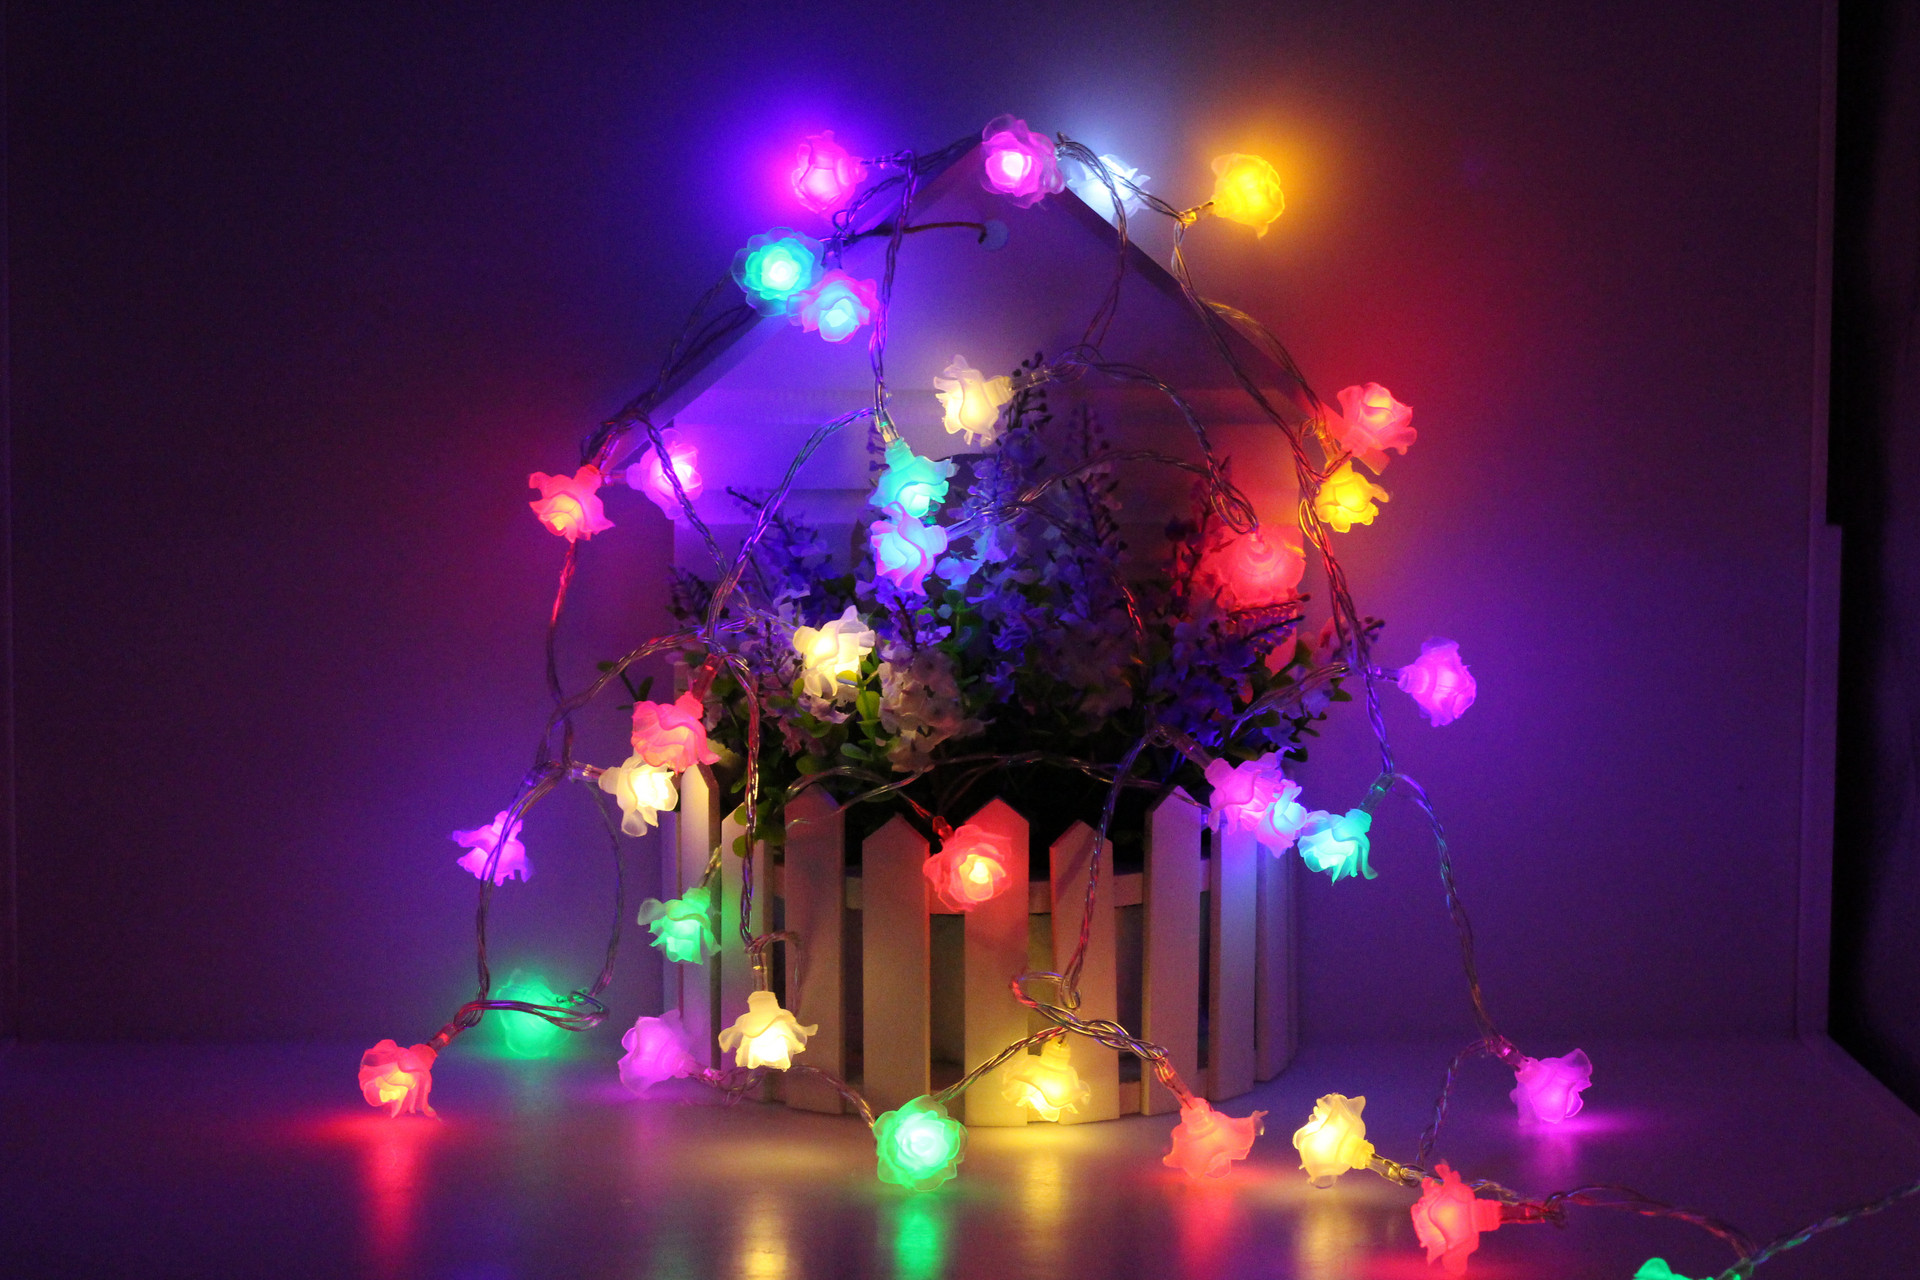 How can Customers Buy Novel Colorful Led Night Lights?